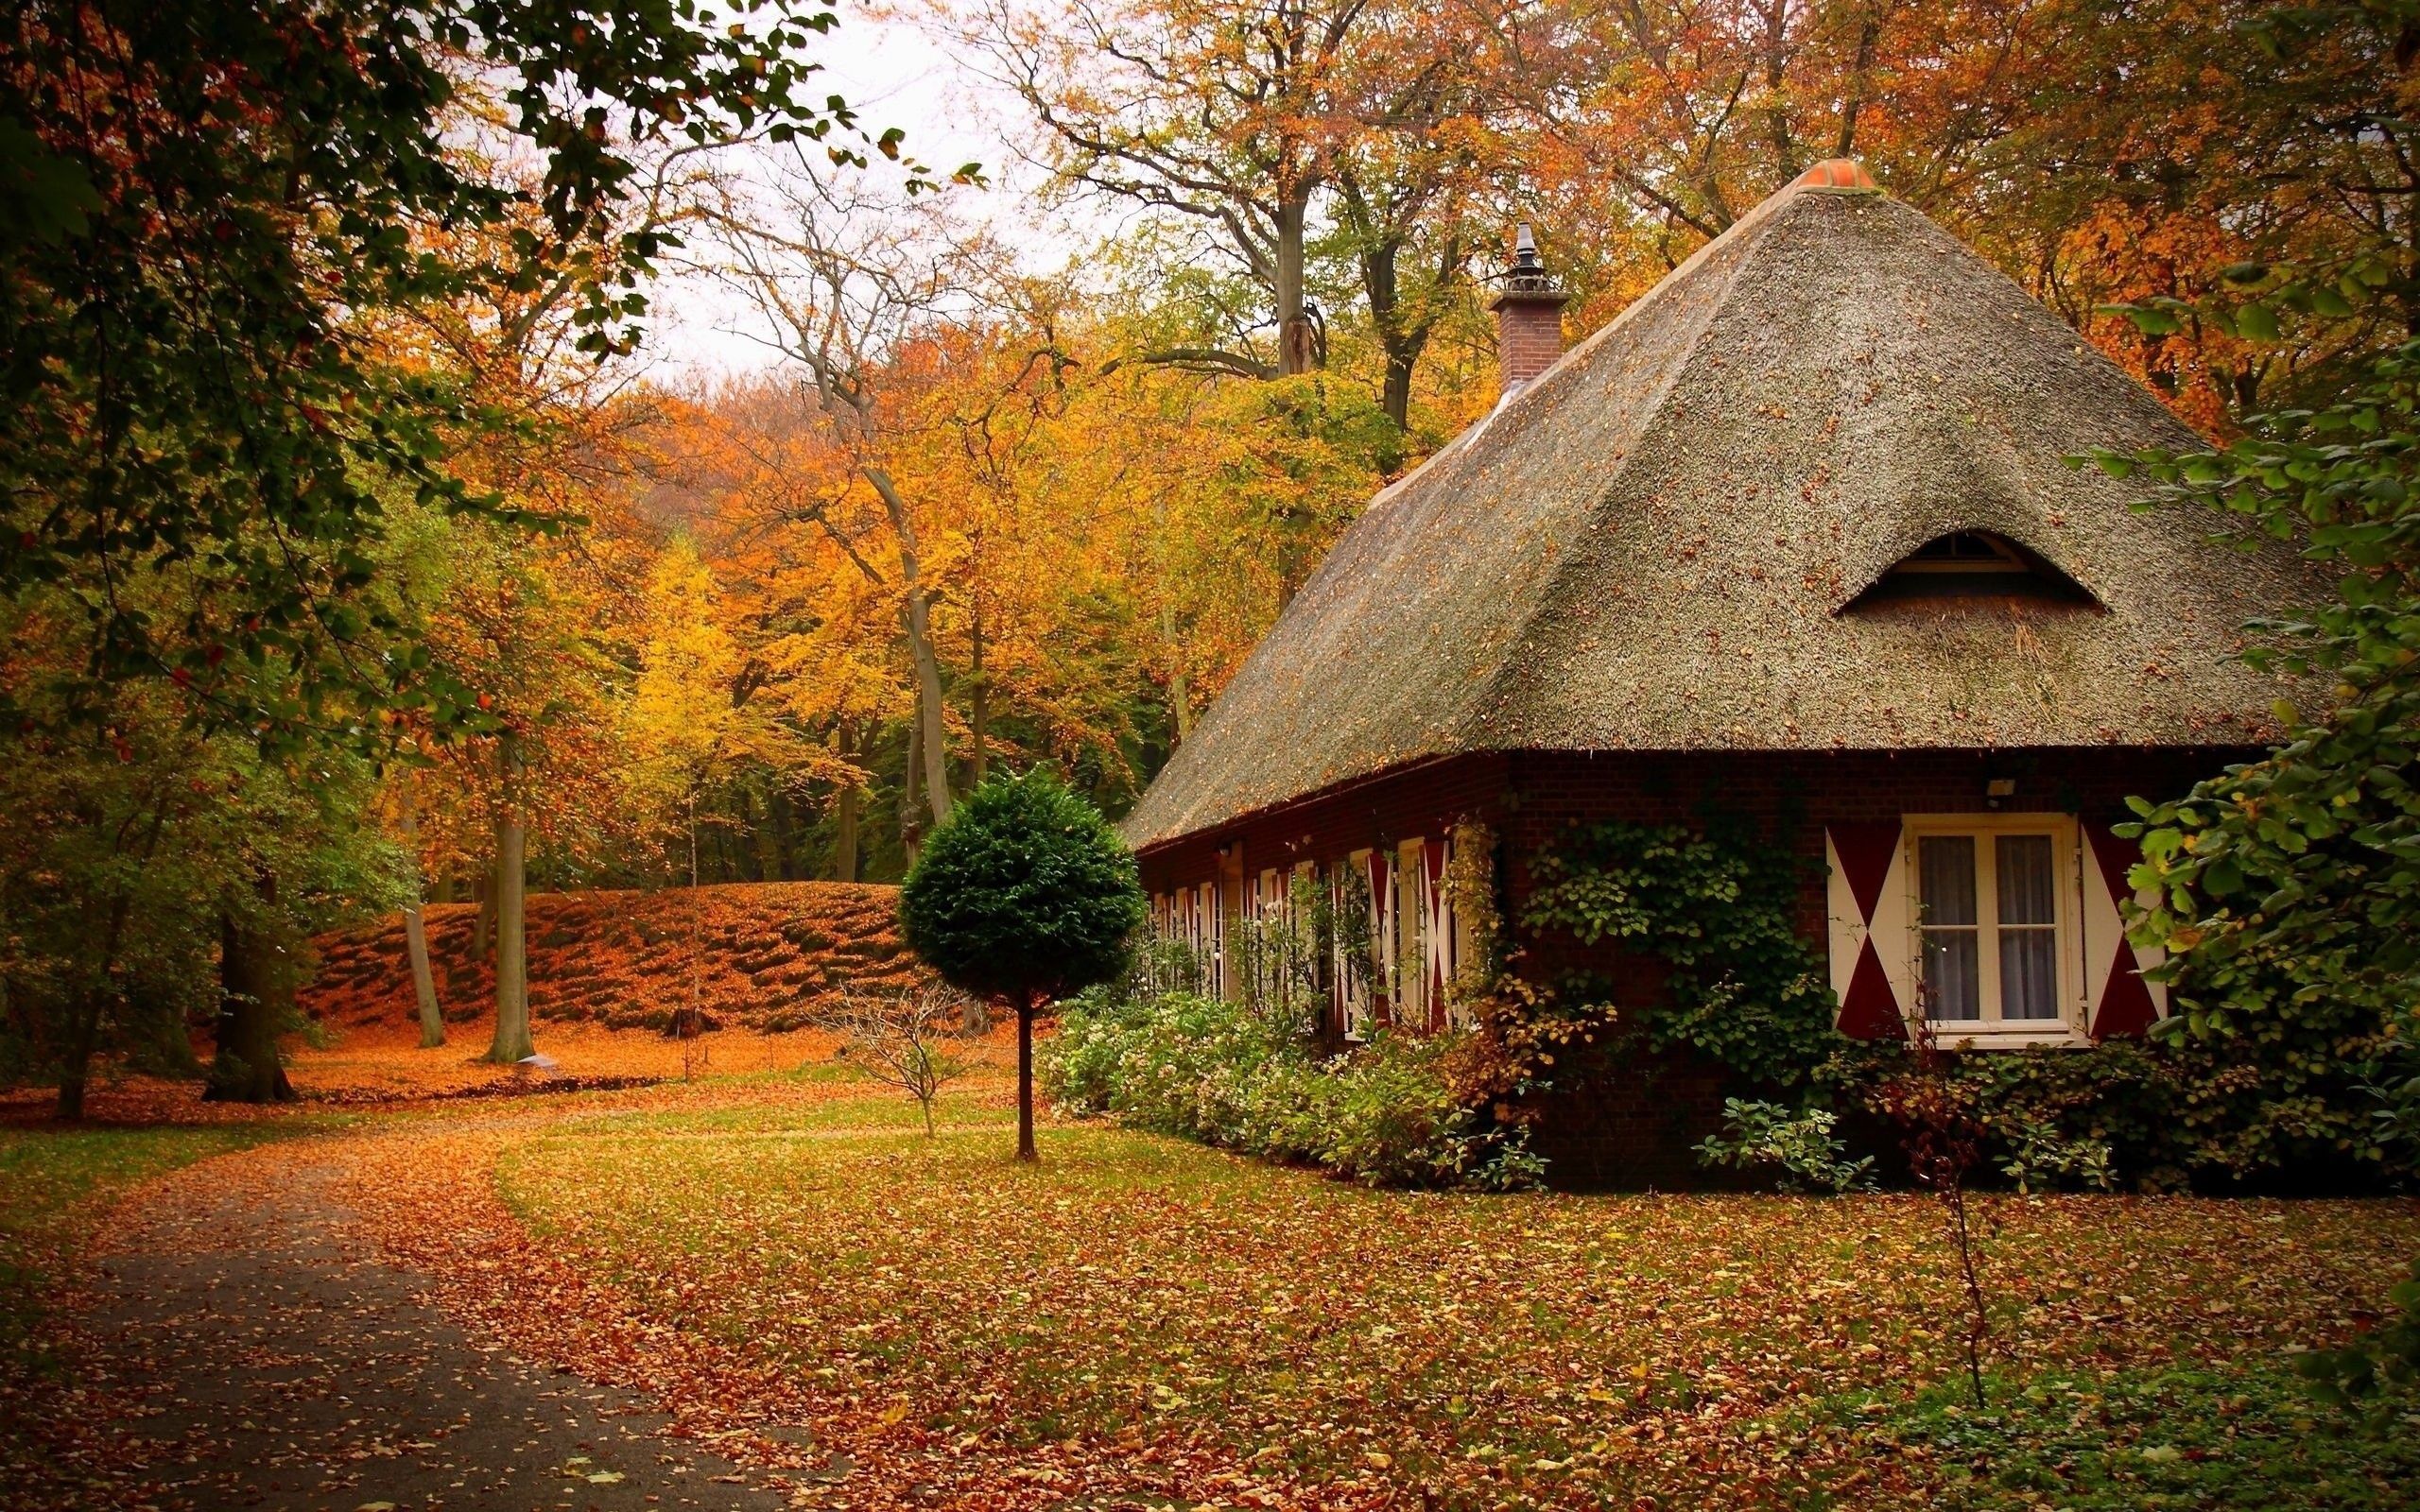 Country House in Autumn wallpaper. Country House in Autumn